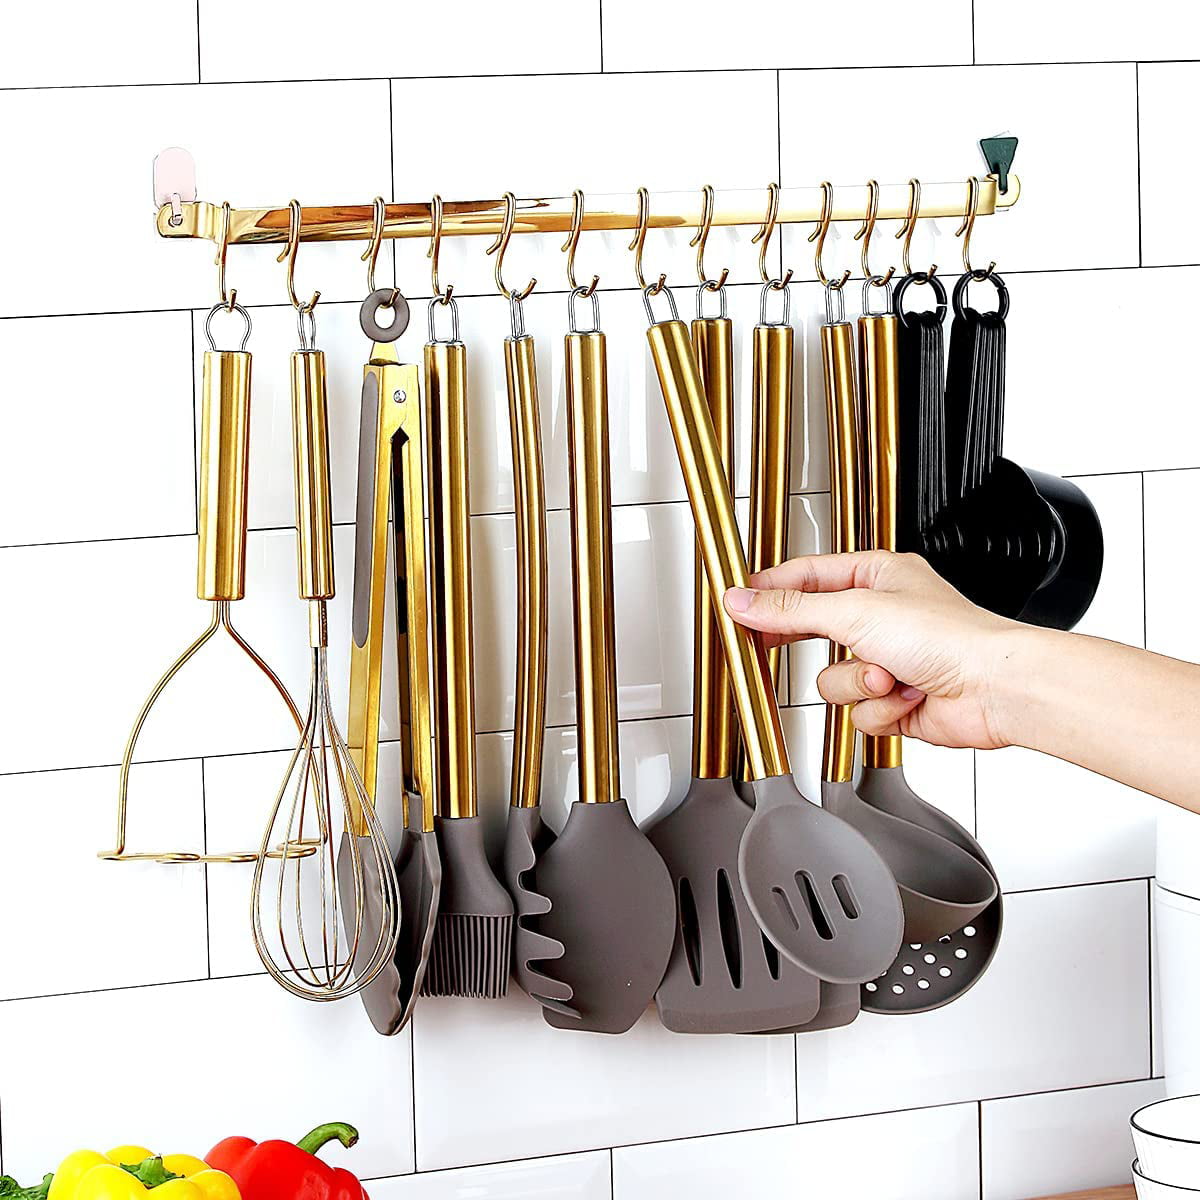 8-Piece Non-Stick Silicone Cooking Utensils Set with Stand, Sturdy